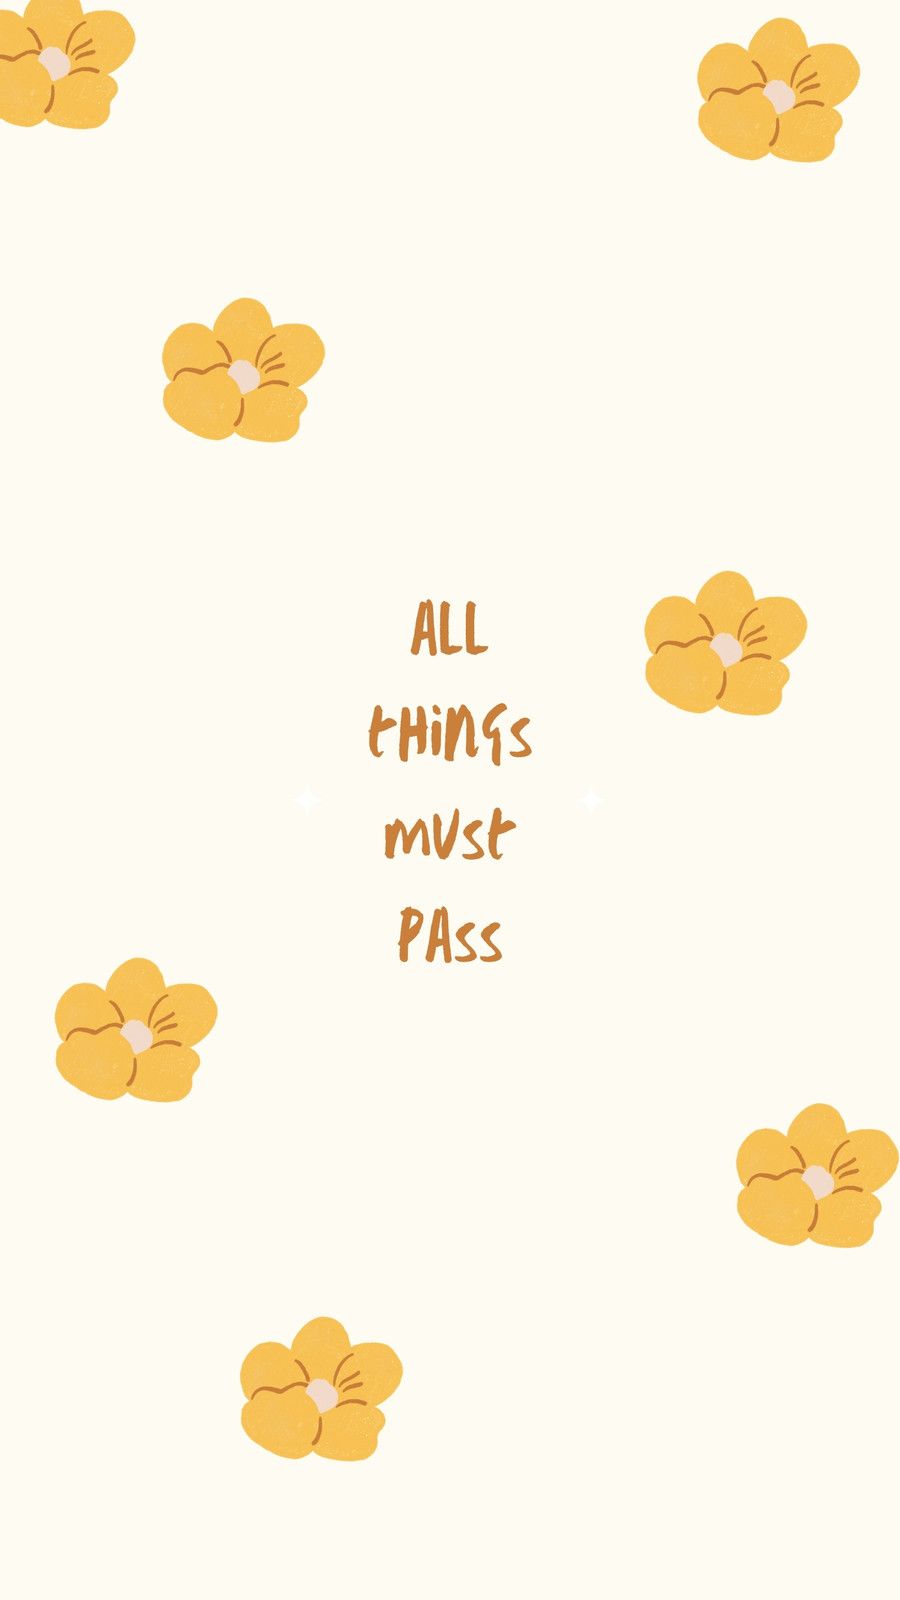 All things must pass. - Hand drawn